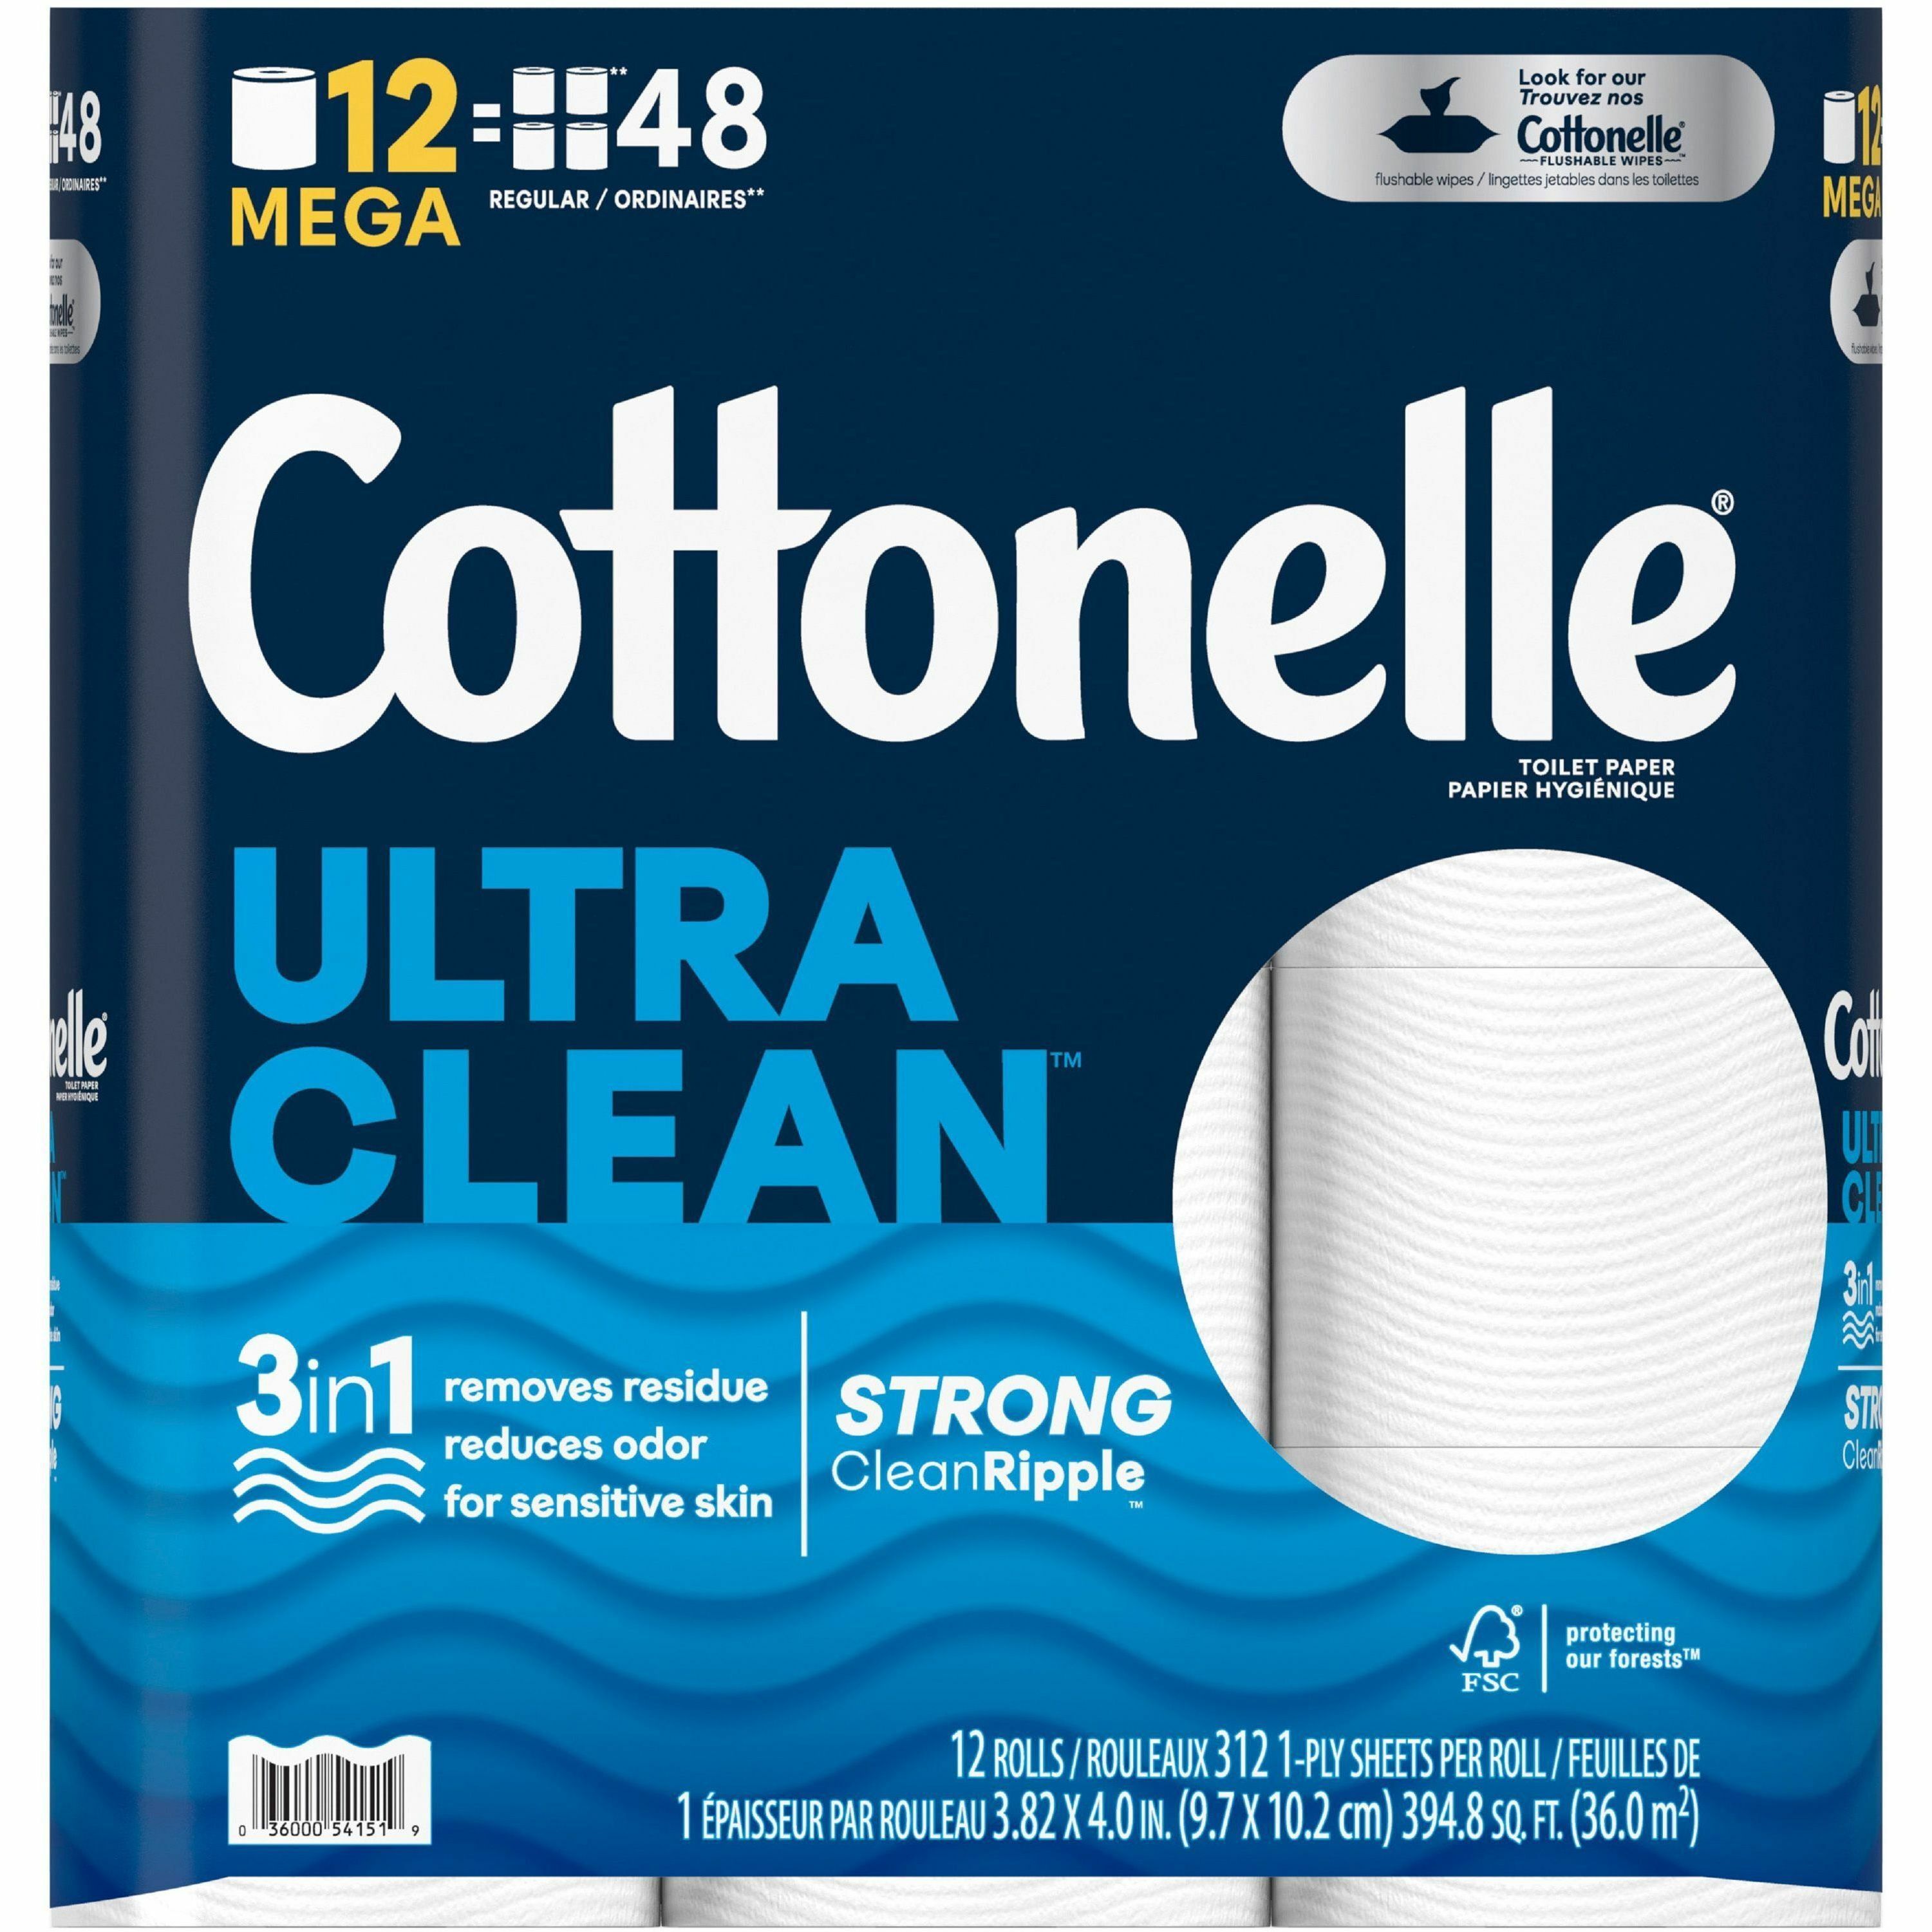 cottonelle-cleancare-bath-tissue-312-sheets-roll-white-fiber-strong-thick-soft-sewer-safe-septic-safe-flushable-clog-safe-hypoallergenic-biodegradable-textured-for-bathroom-toilet-12-rolls-per-pack-4-carton_kcc54151ct - 2